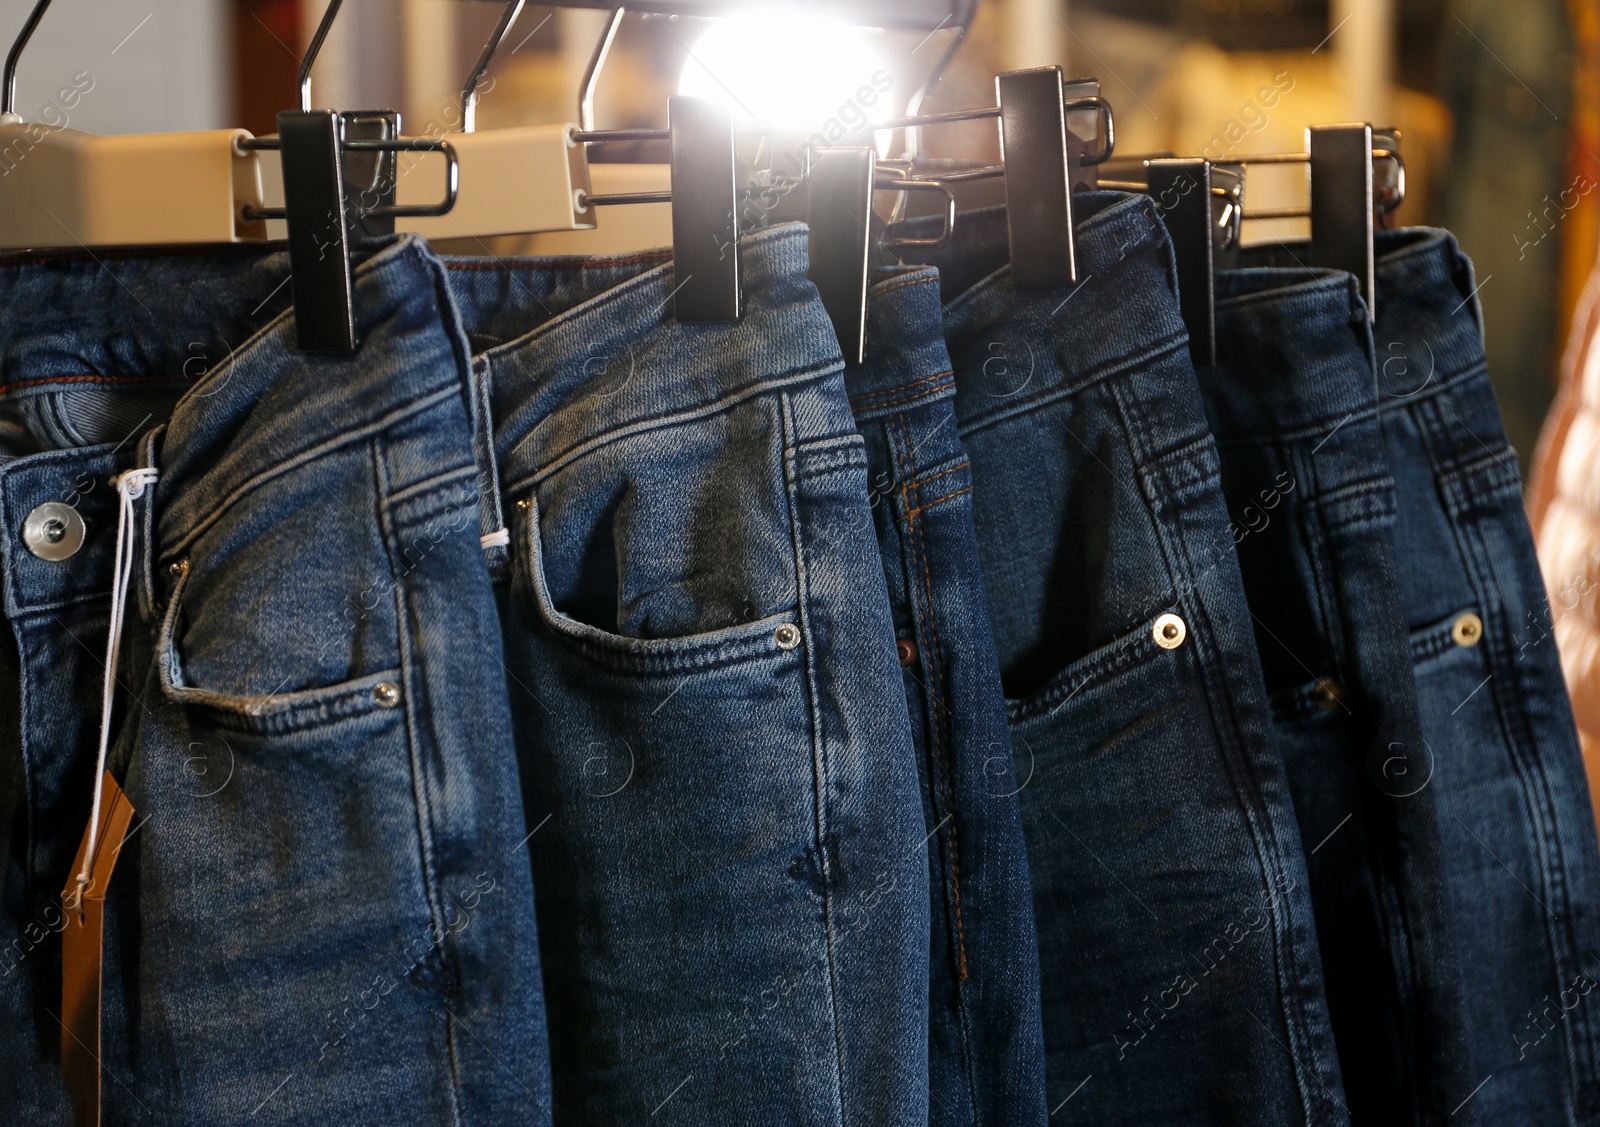 Photo of Modern jeans hanging on clothing rack in shop, closeup